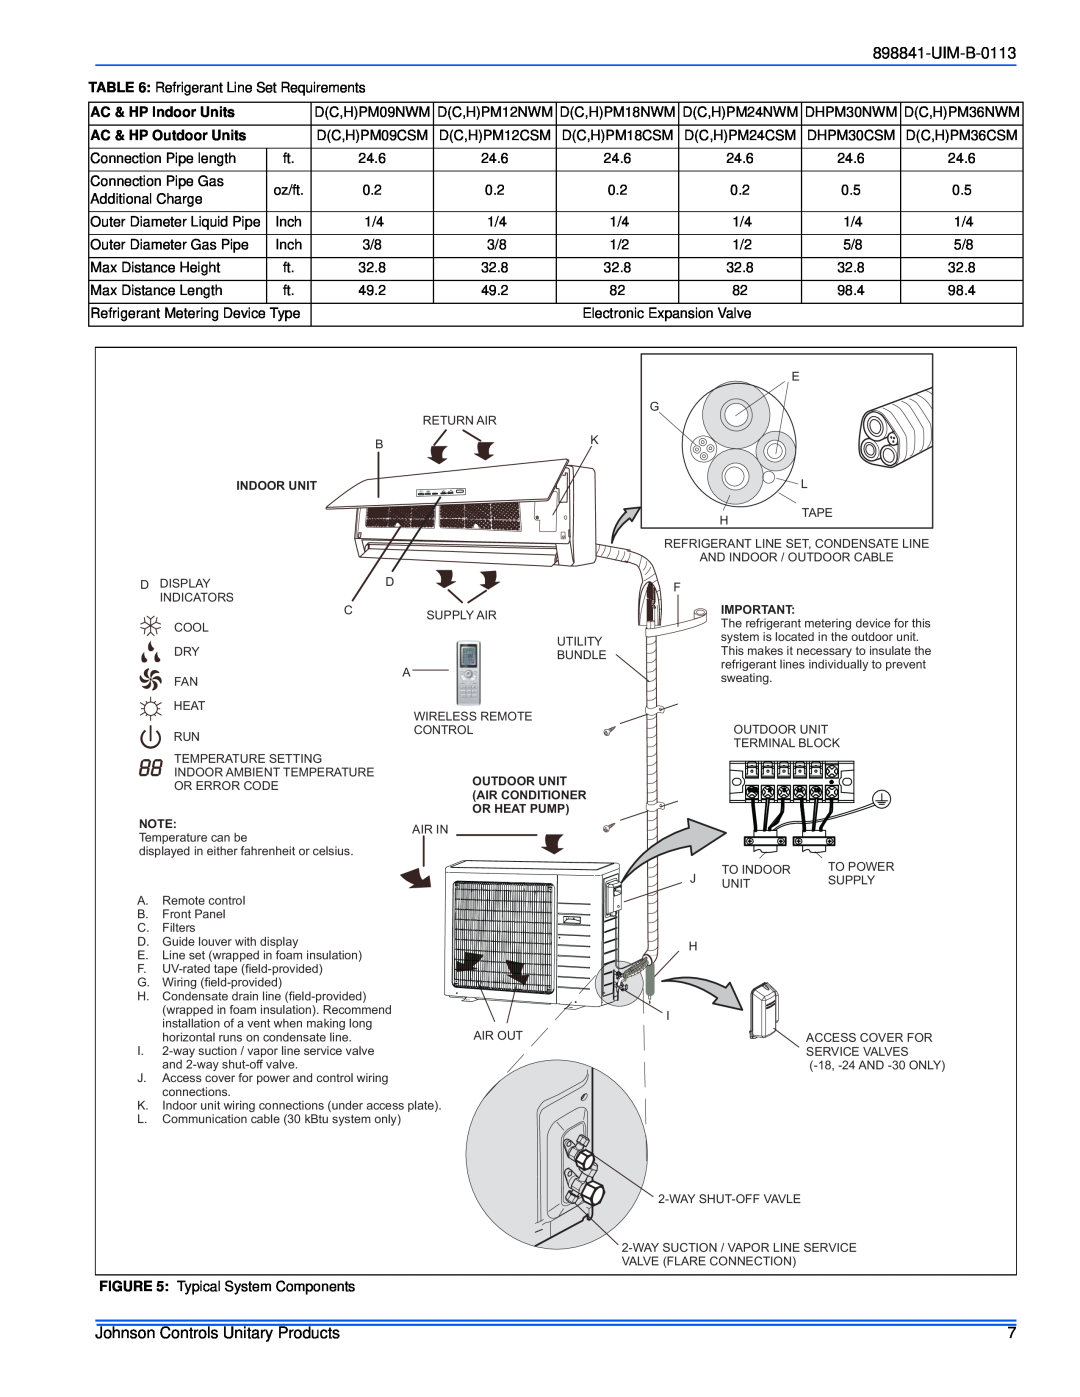 Johnson Controls 22 SEER installation manual Johnson Controls Unitary Products, AC & HP Indoor Units, AC & HP Outdoor Units 